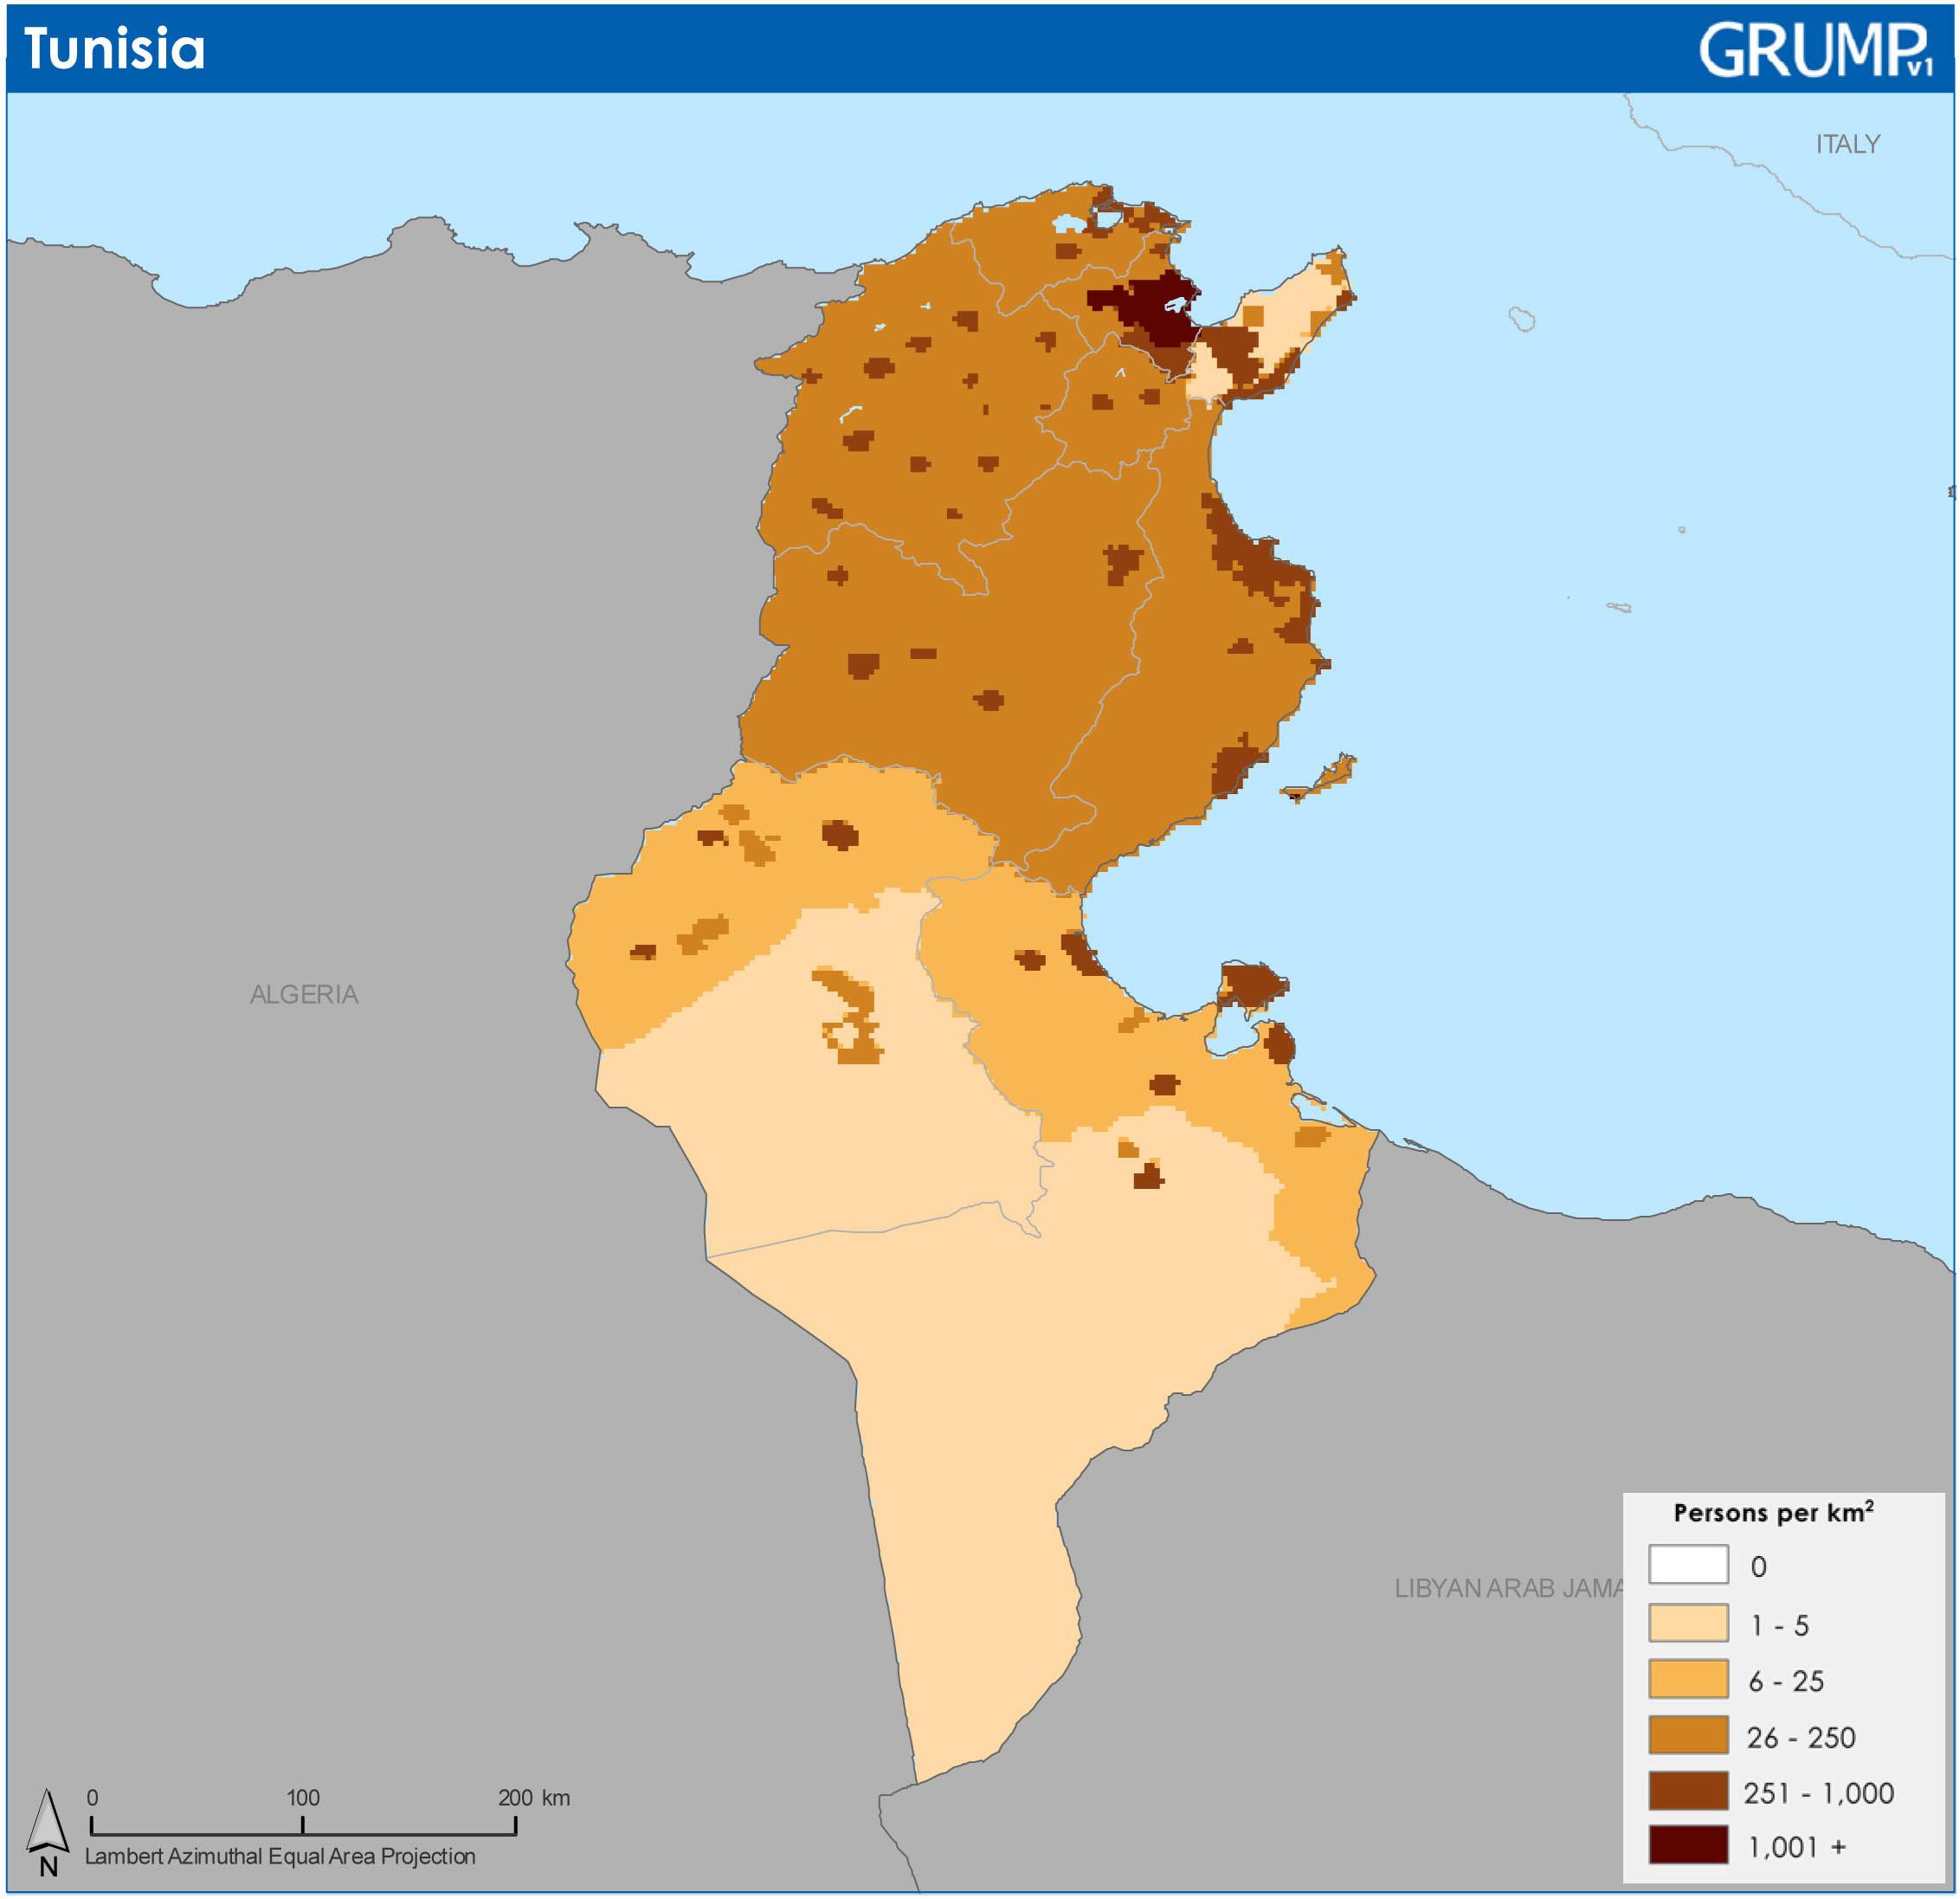 Map of Tunisia population population density and structure of